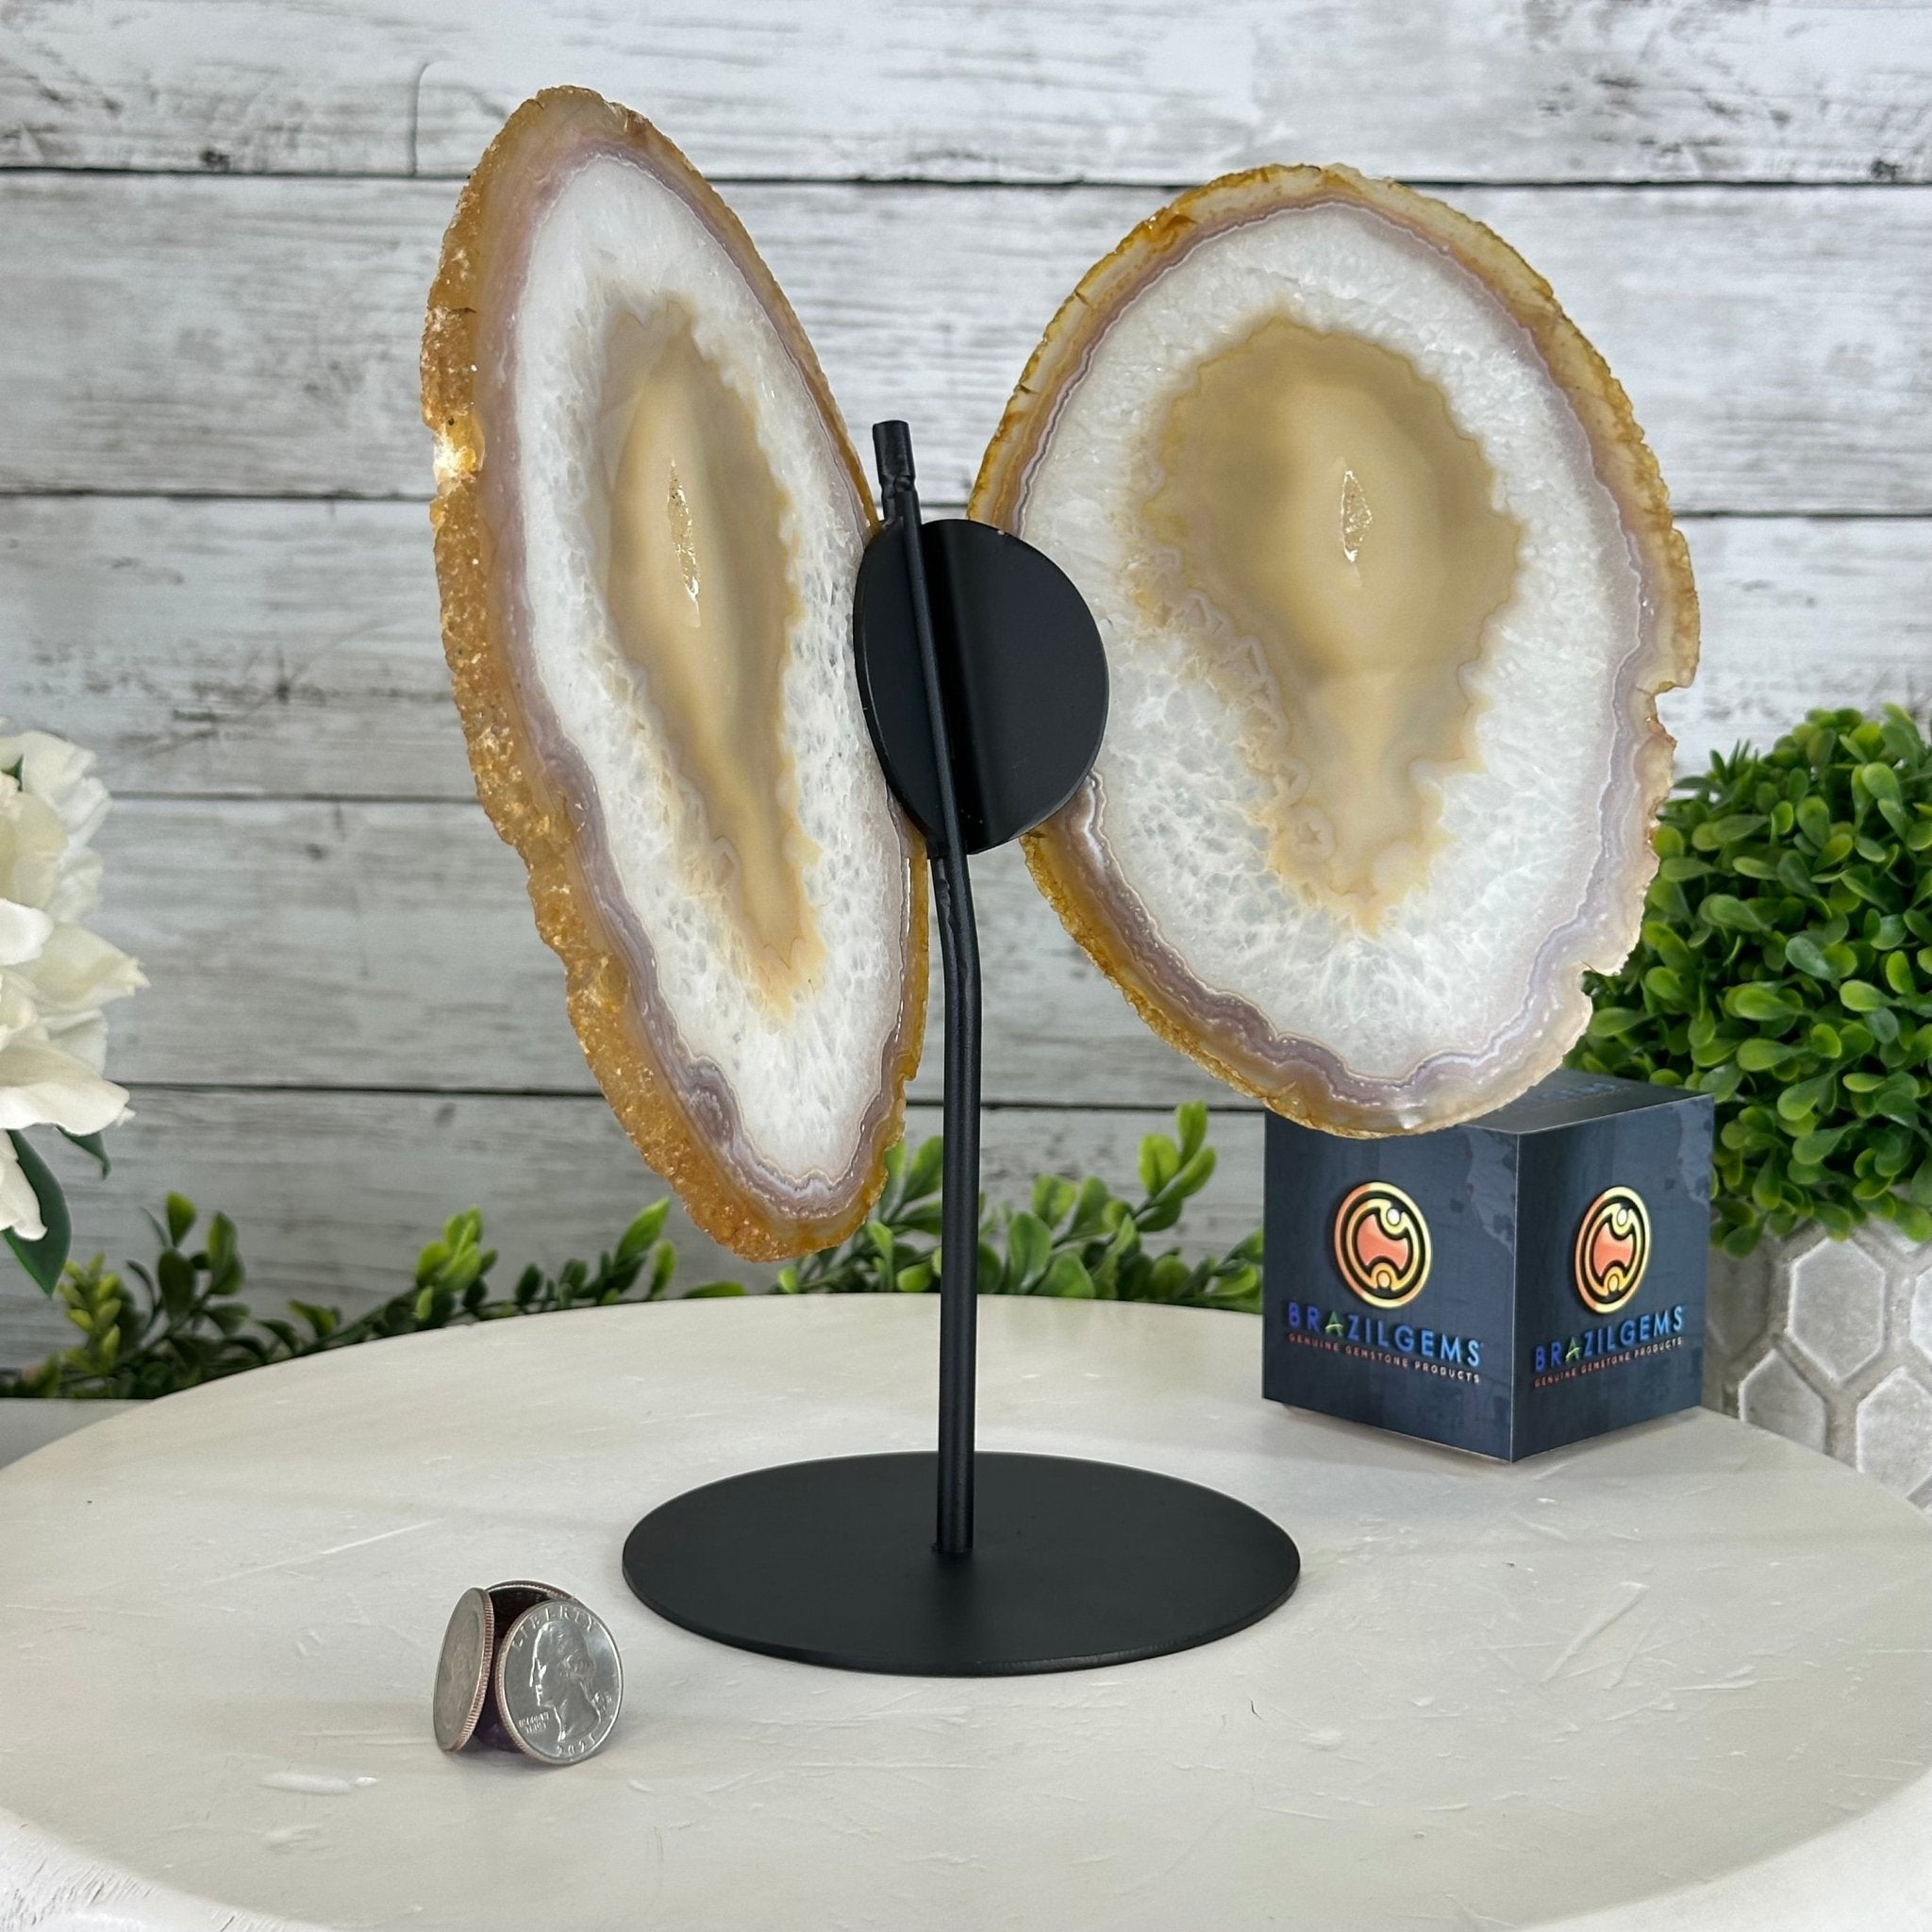 Natural Brazilian Agate "Butterfly Wings", 10.1" Tall #5050NA-121 - Brazil GemsBrazil GemsNatural Brazilian Agate "Butterfly Wings", 10.1" Tall #5050NA-121Agate Butterfly Wings5050NA-121